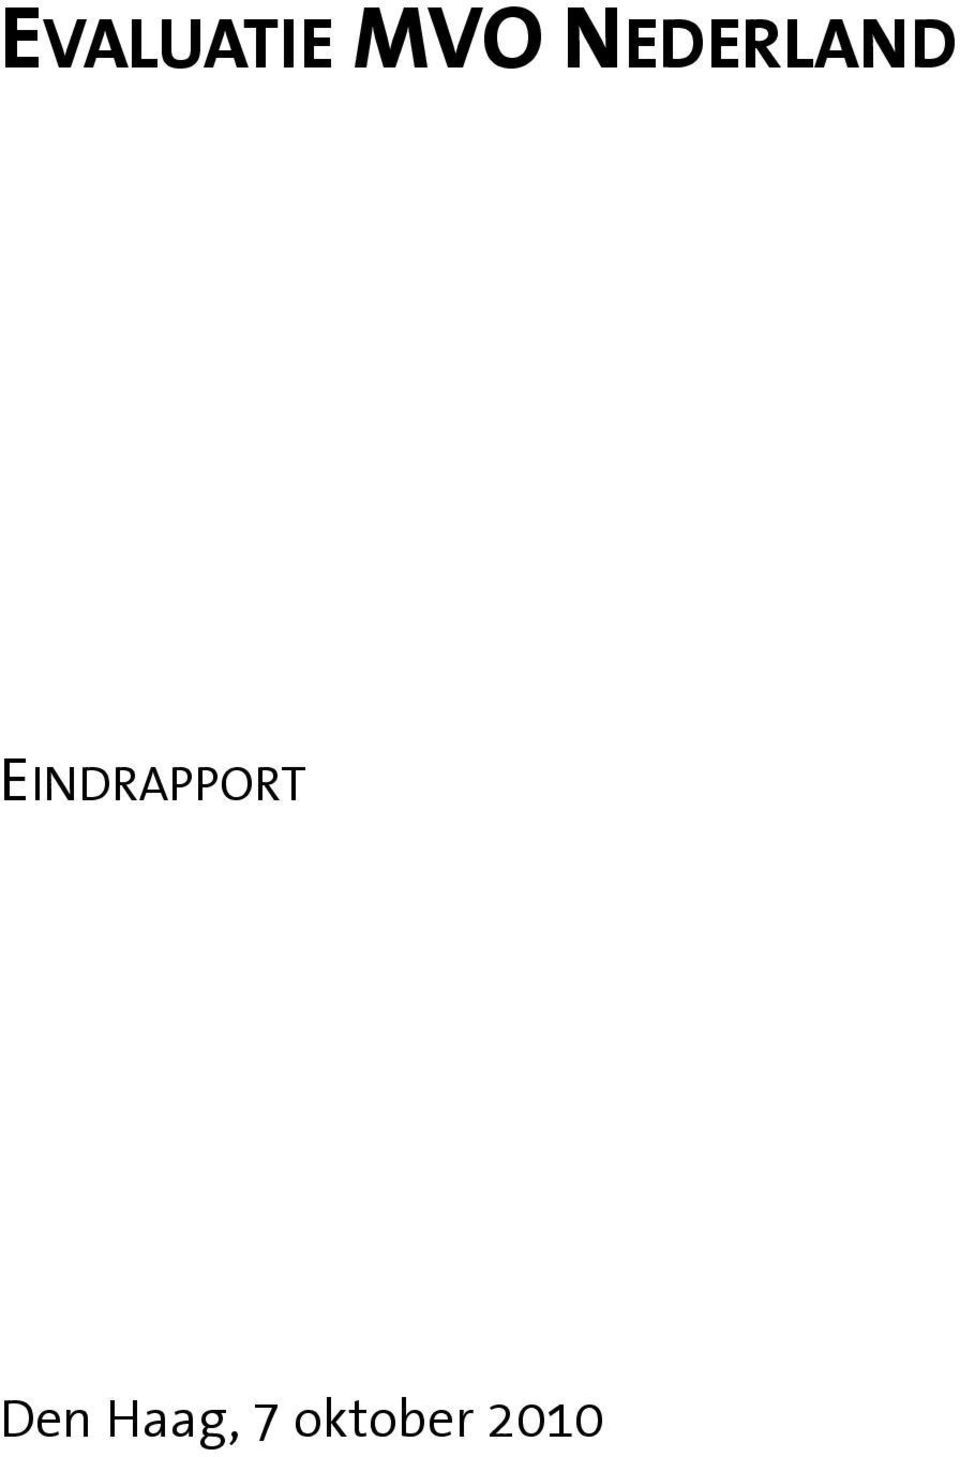 EINDRAPPORT